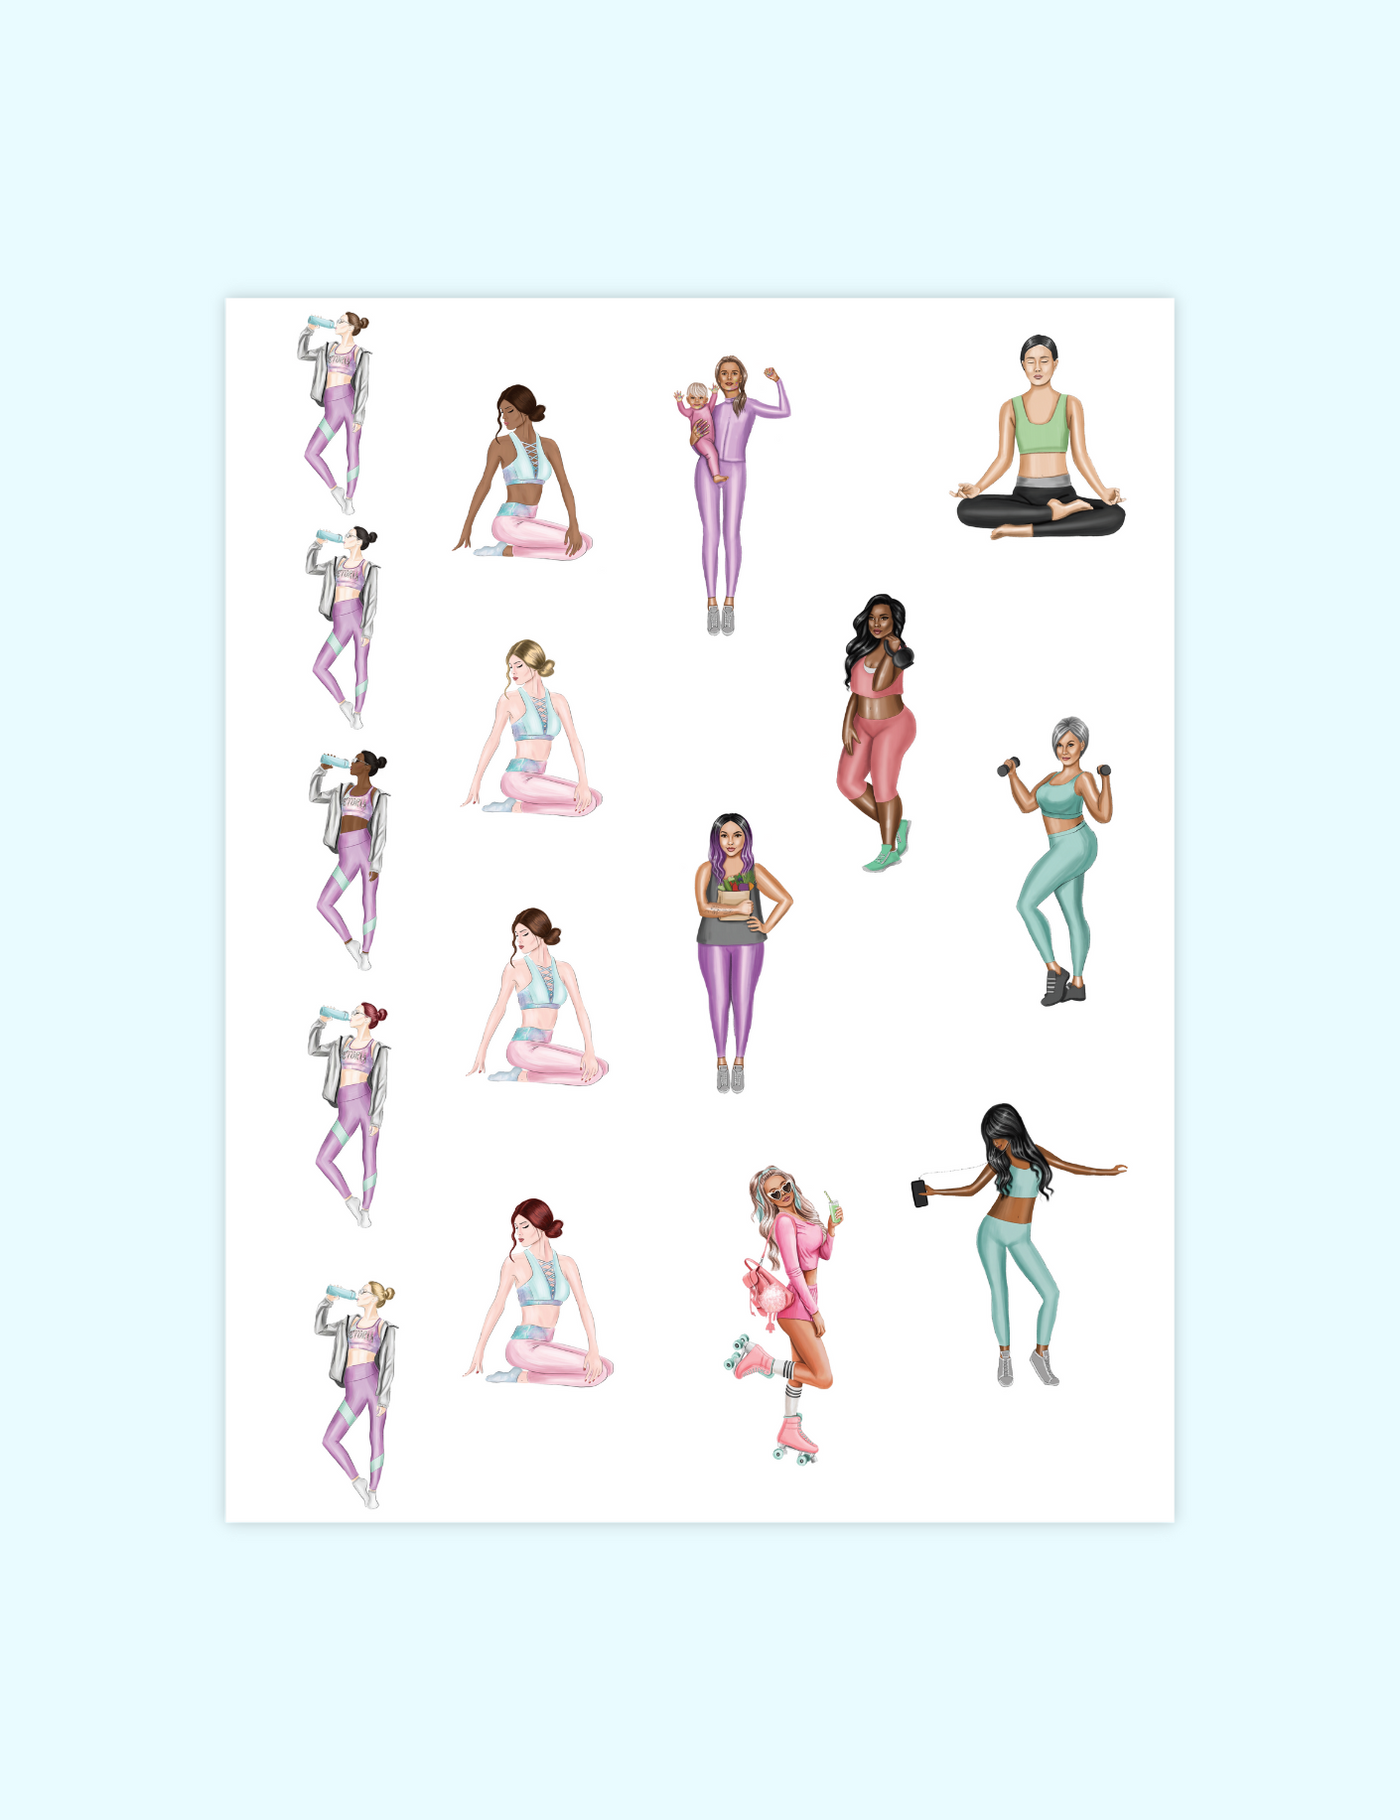 Health and Fitness Stickers